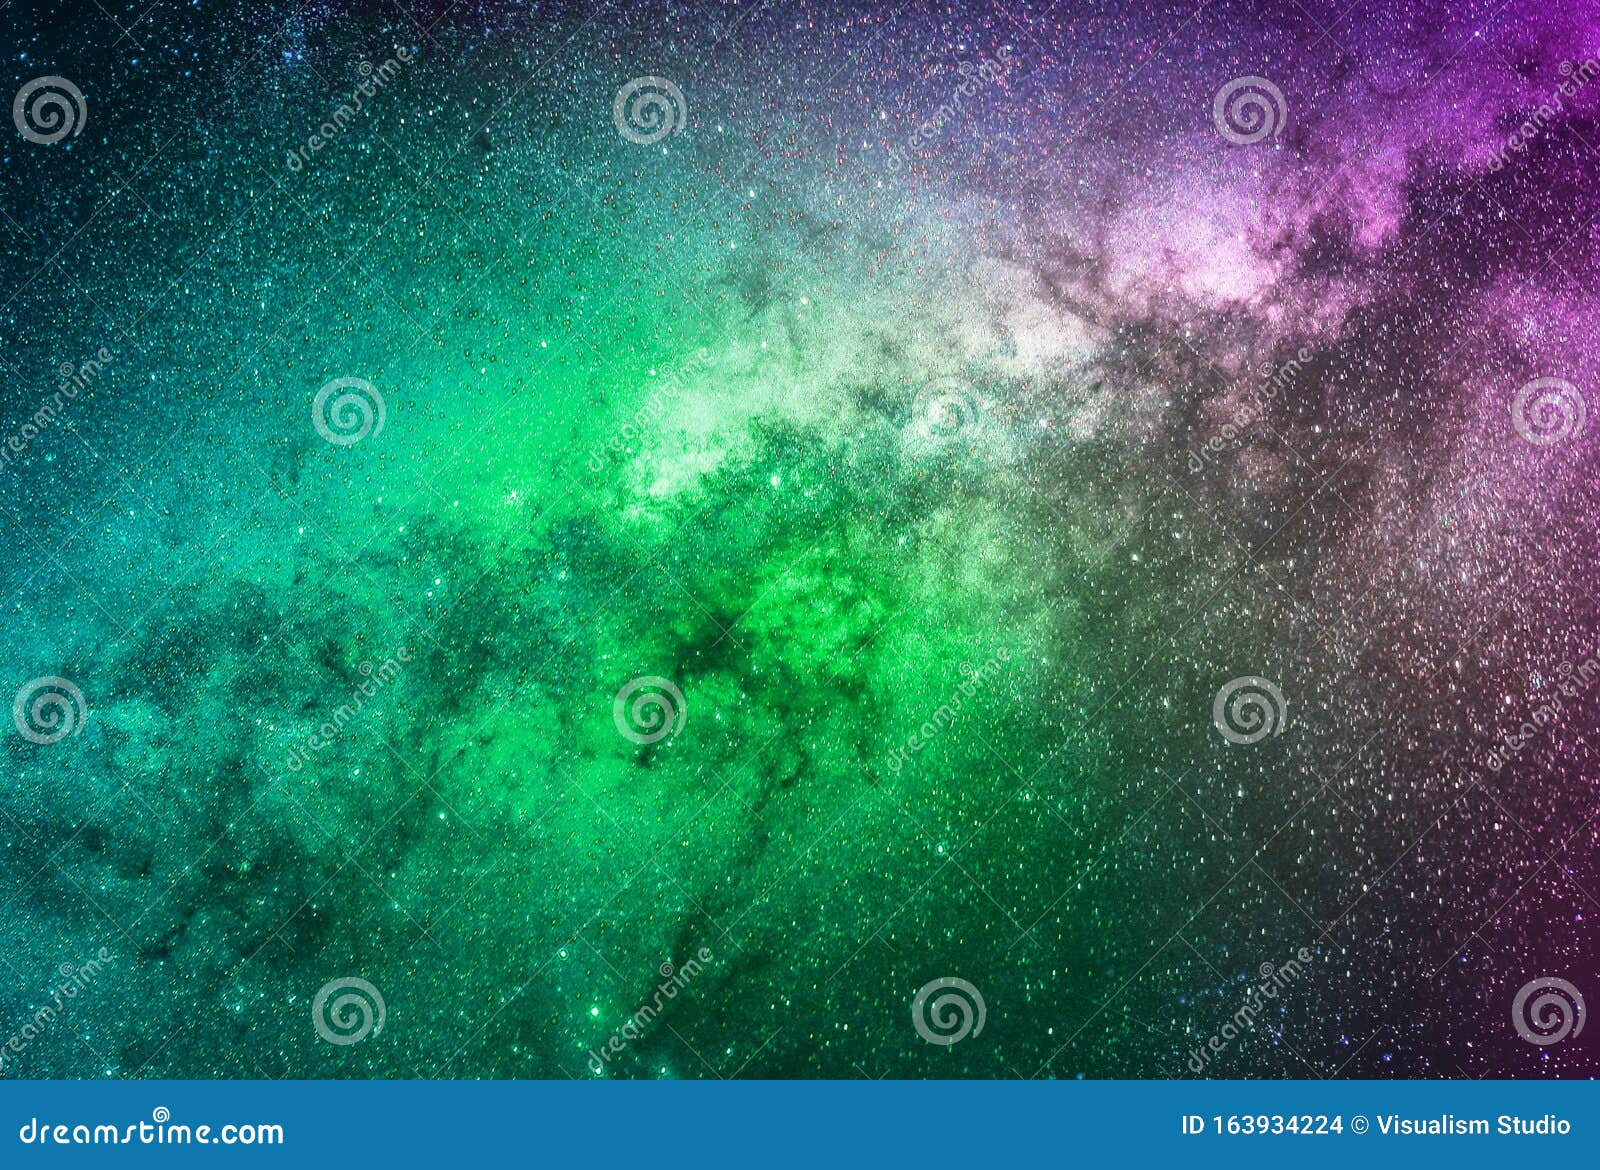 Background Of Abstract Galaxies With Stars And Planets With Galaxy